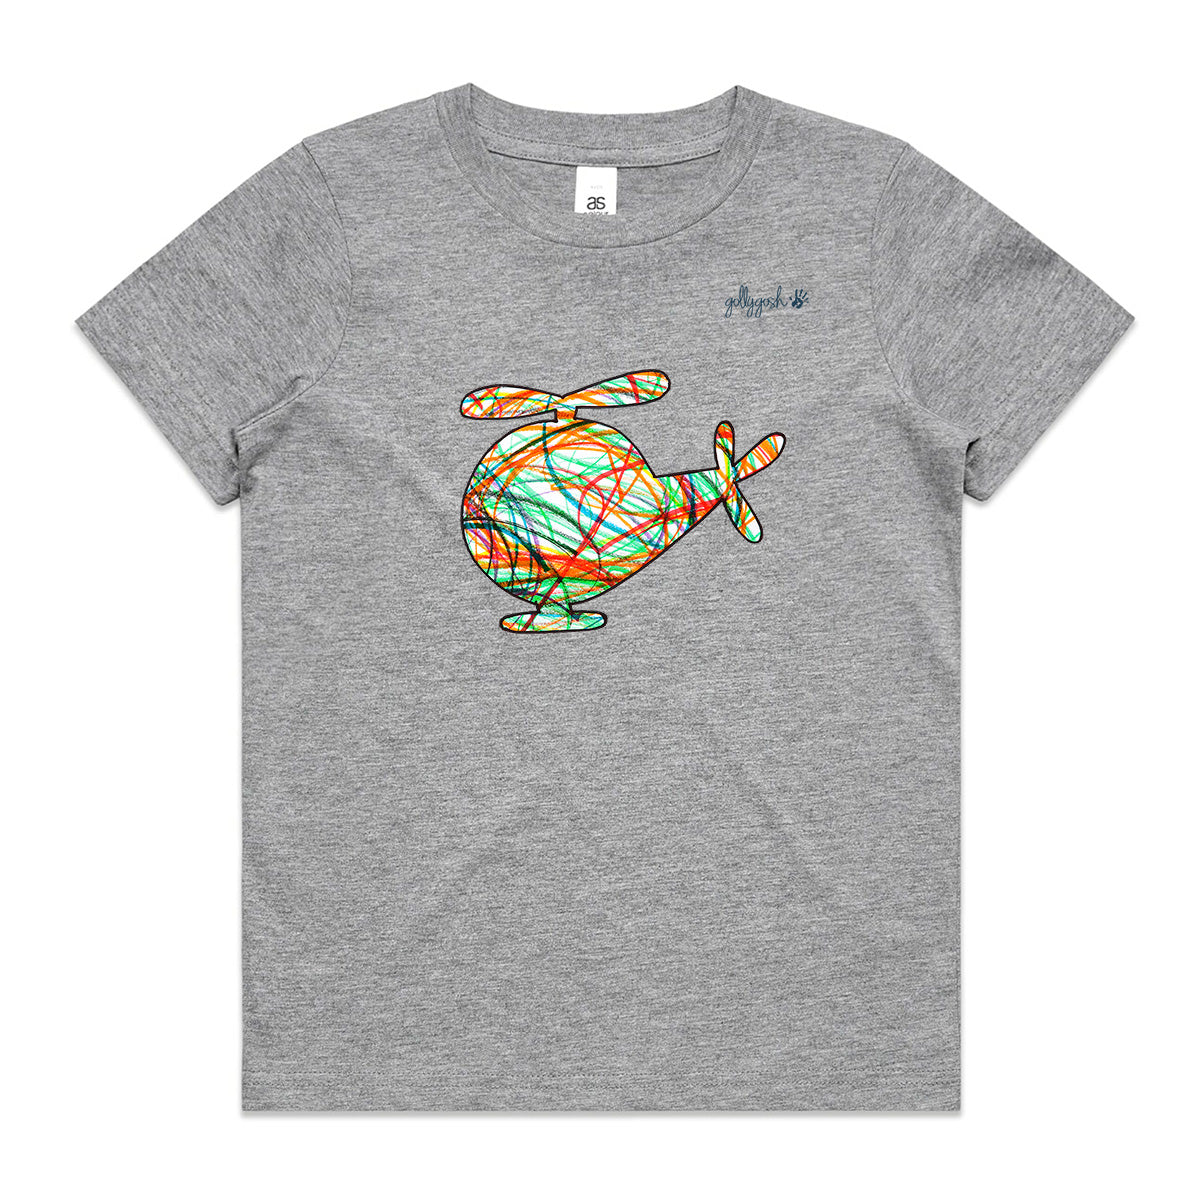 Helicopter - Kids Tee